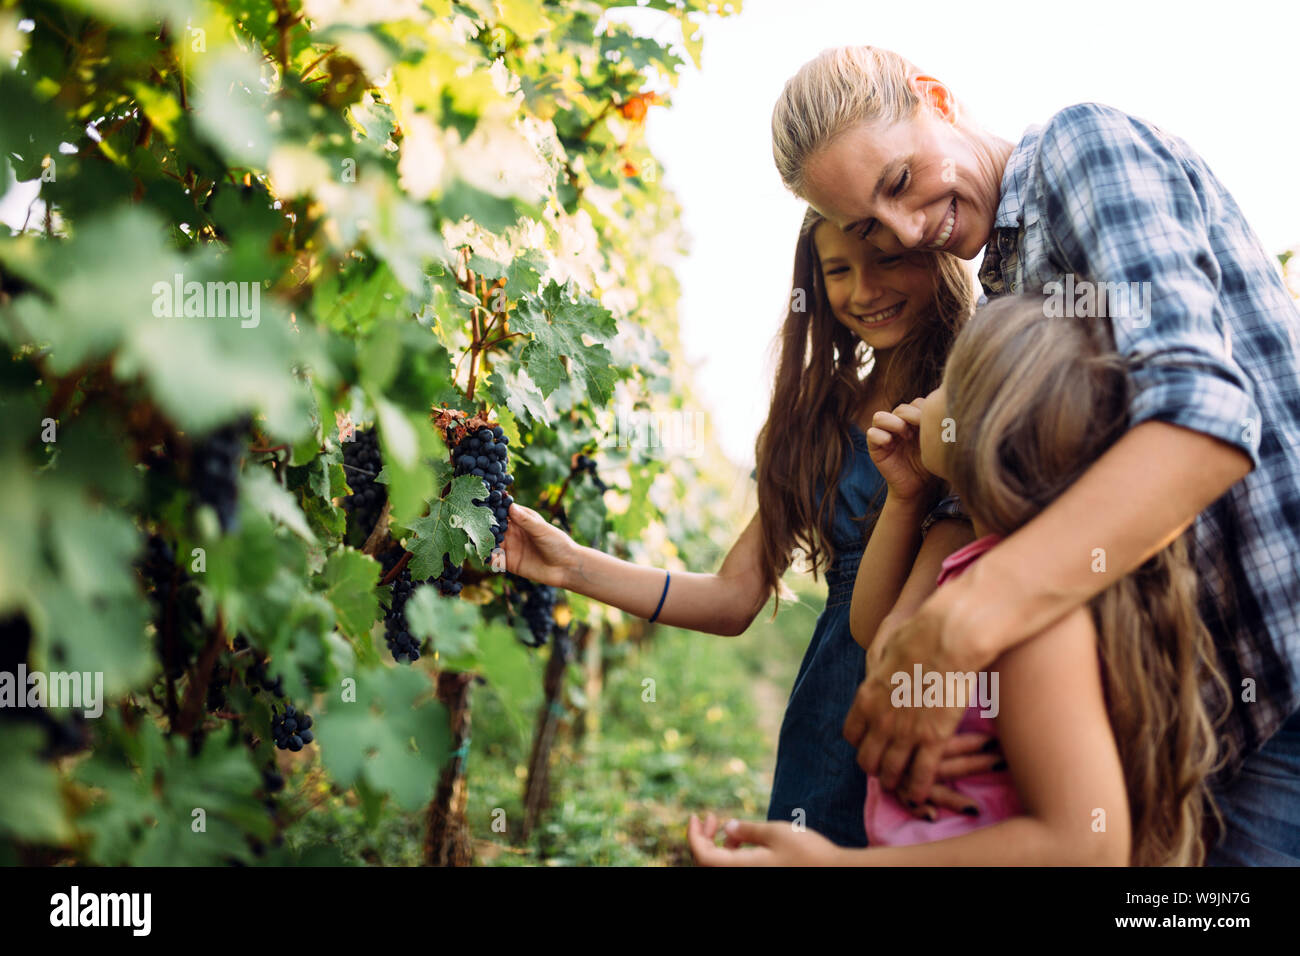 Winemaker cute young family together in vineyard Stock Photo